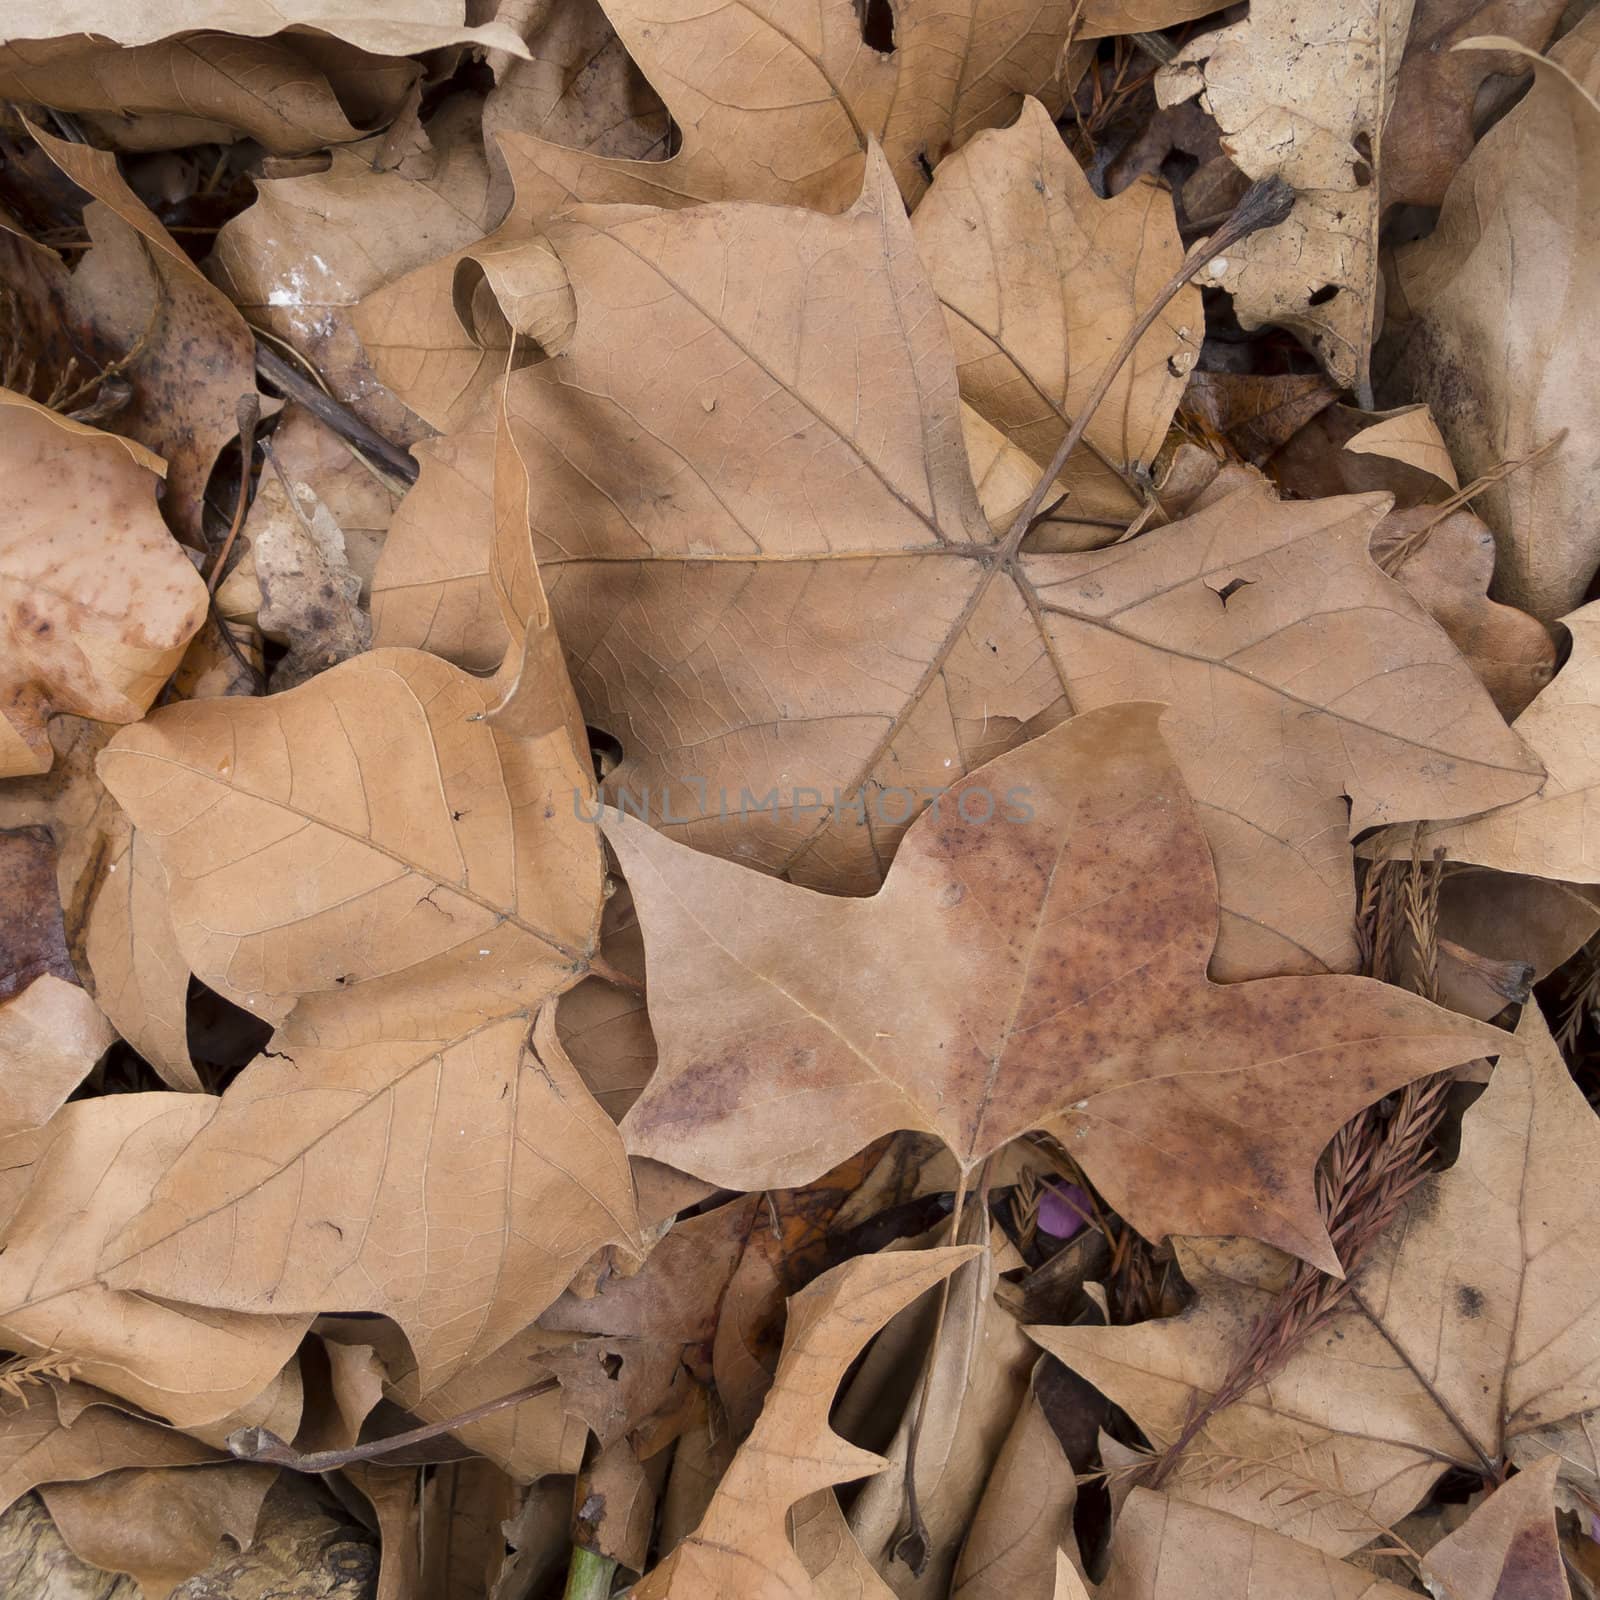 Dead leaves by AlessandroZocc